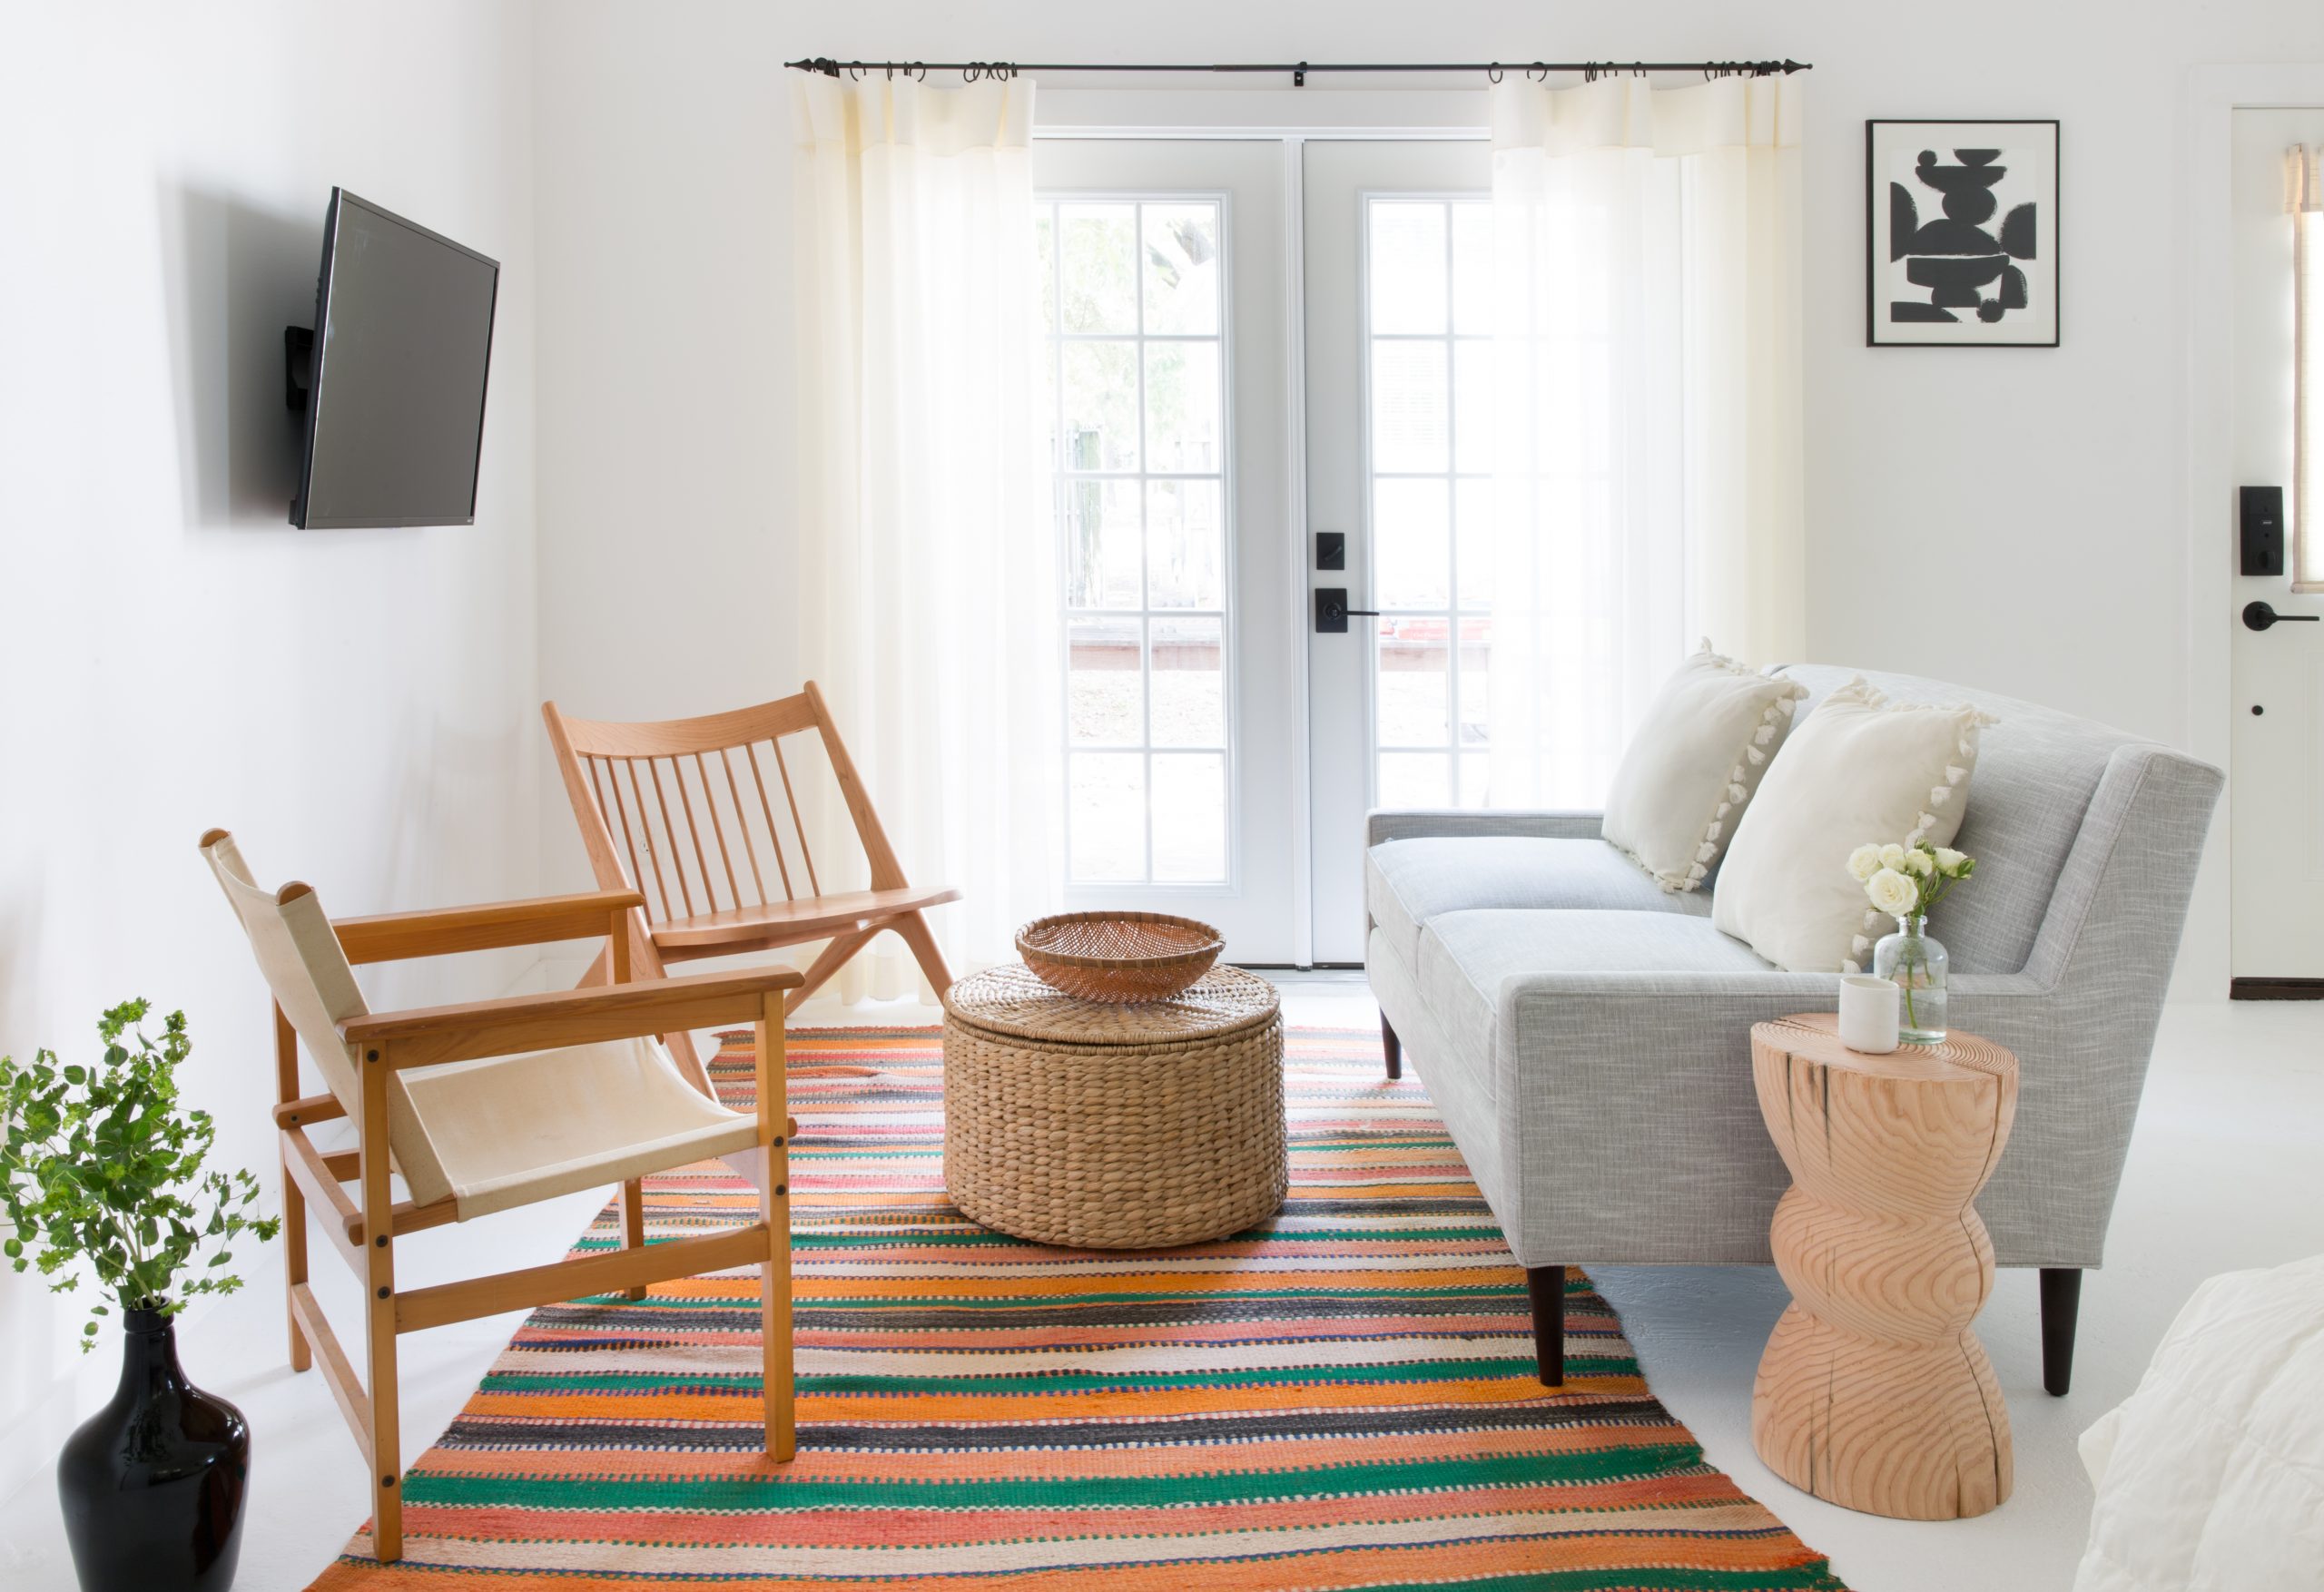 Chanel's Bright and Modern Guest House Renovation - Camille Styles